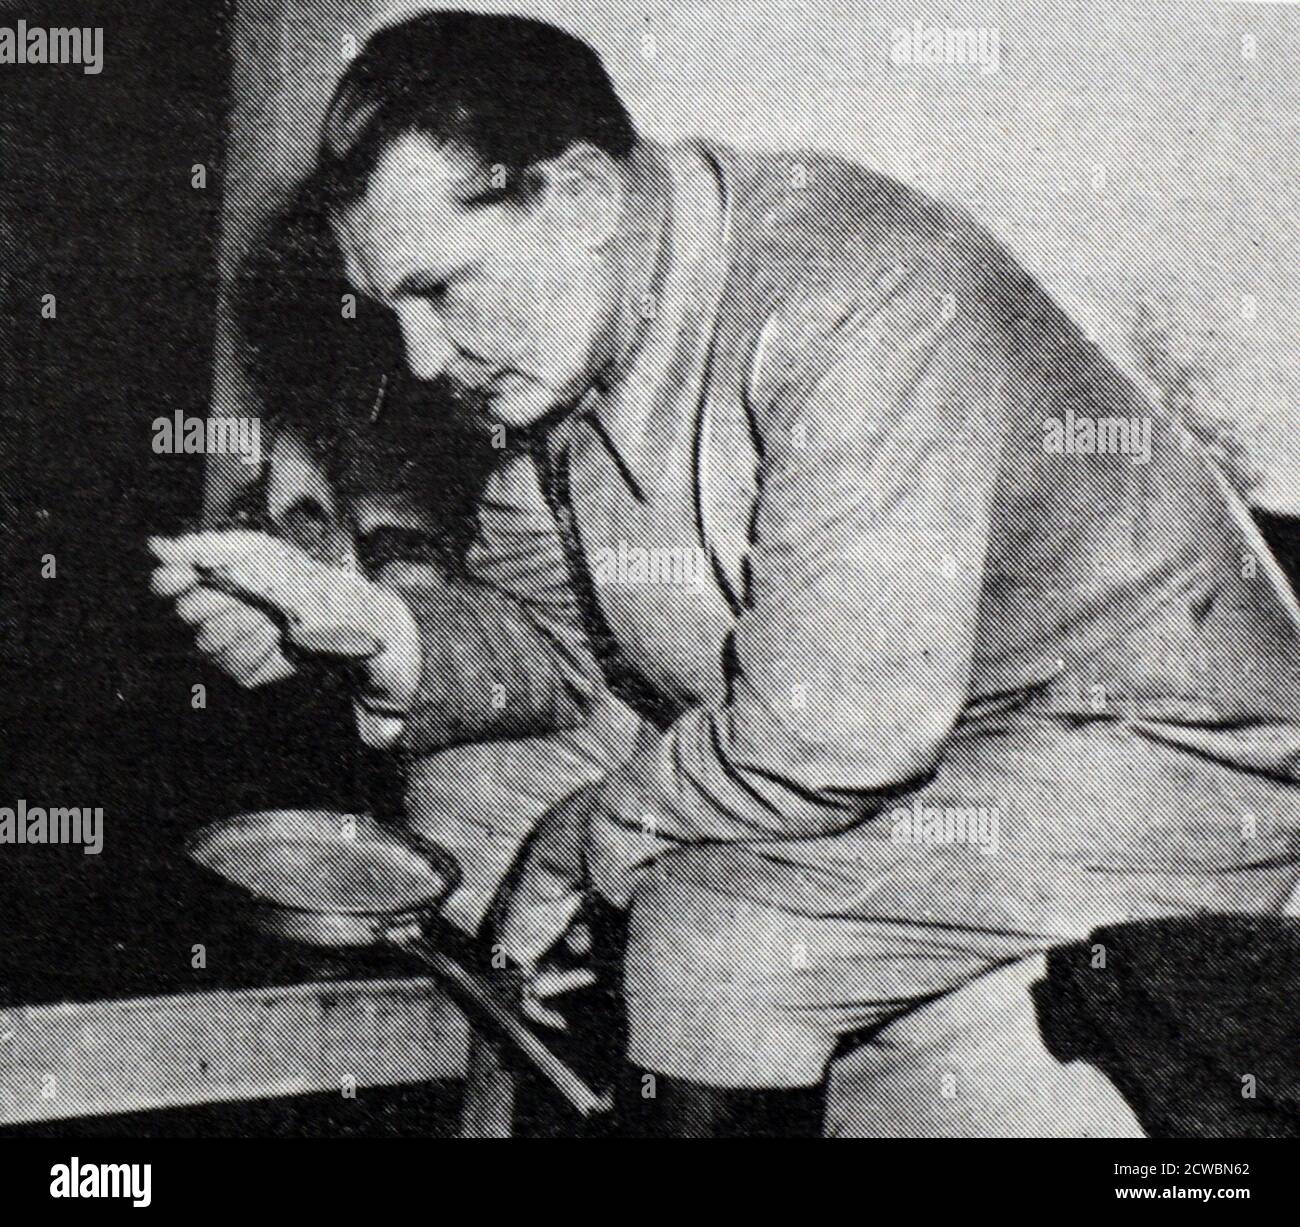 Black and white photograph of World War II (1939-1945) showing images related to the Nuremberg Trials, the largest prosecution in history, and which began in November 1945; Goering having breakfast in his cell. Stock Photo